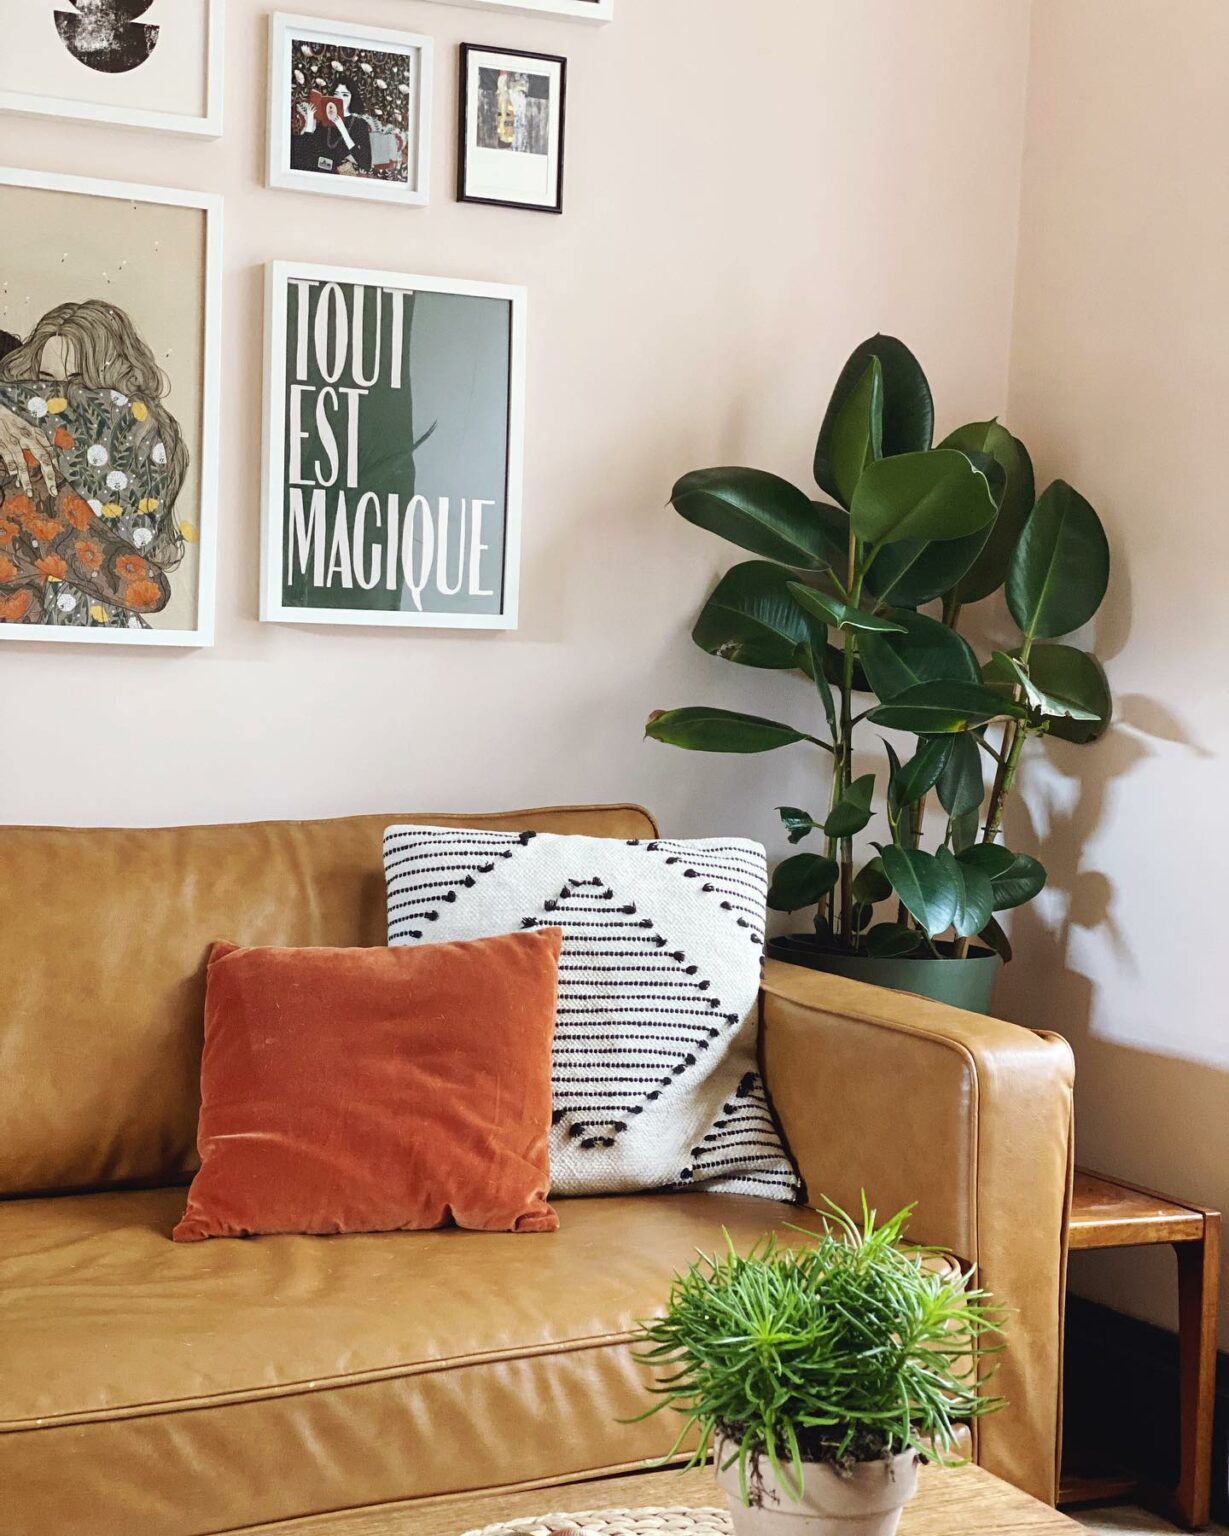 Tan Leather Couch: 27+ Ideas On How To Style This Iconic Piece Of Furniture